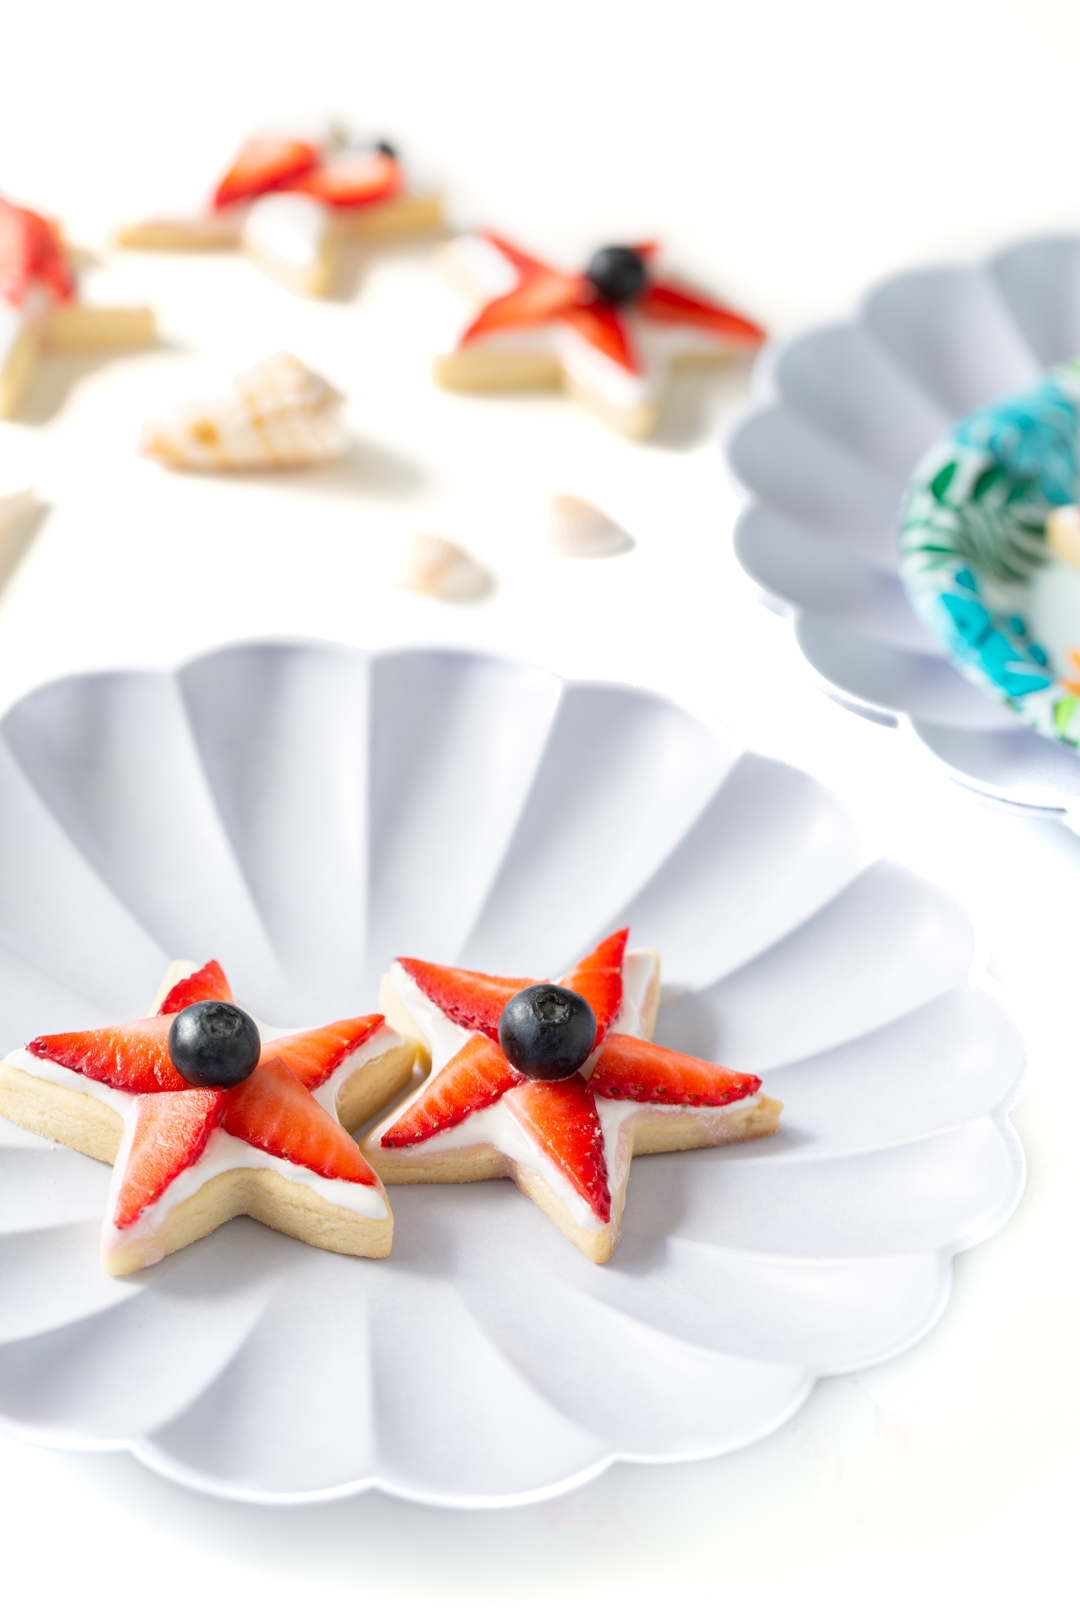 two star shaped cookies with strawberry pieces and blueberries on top resting on a shell inspired plate